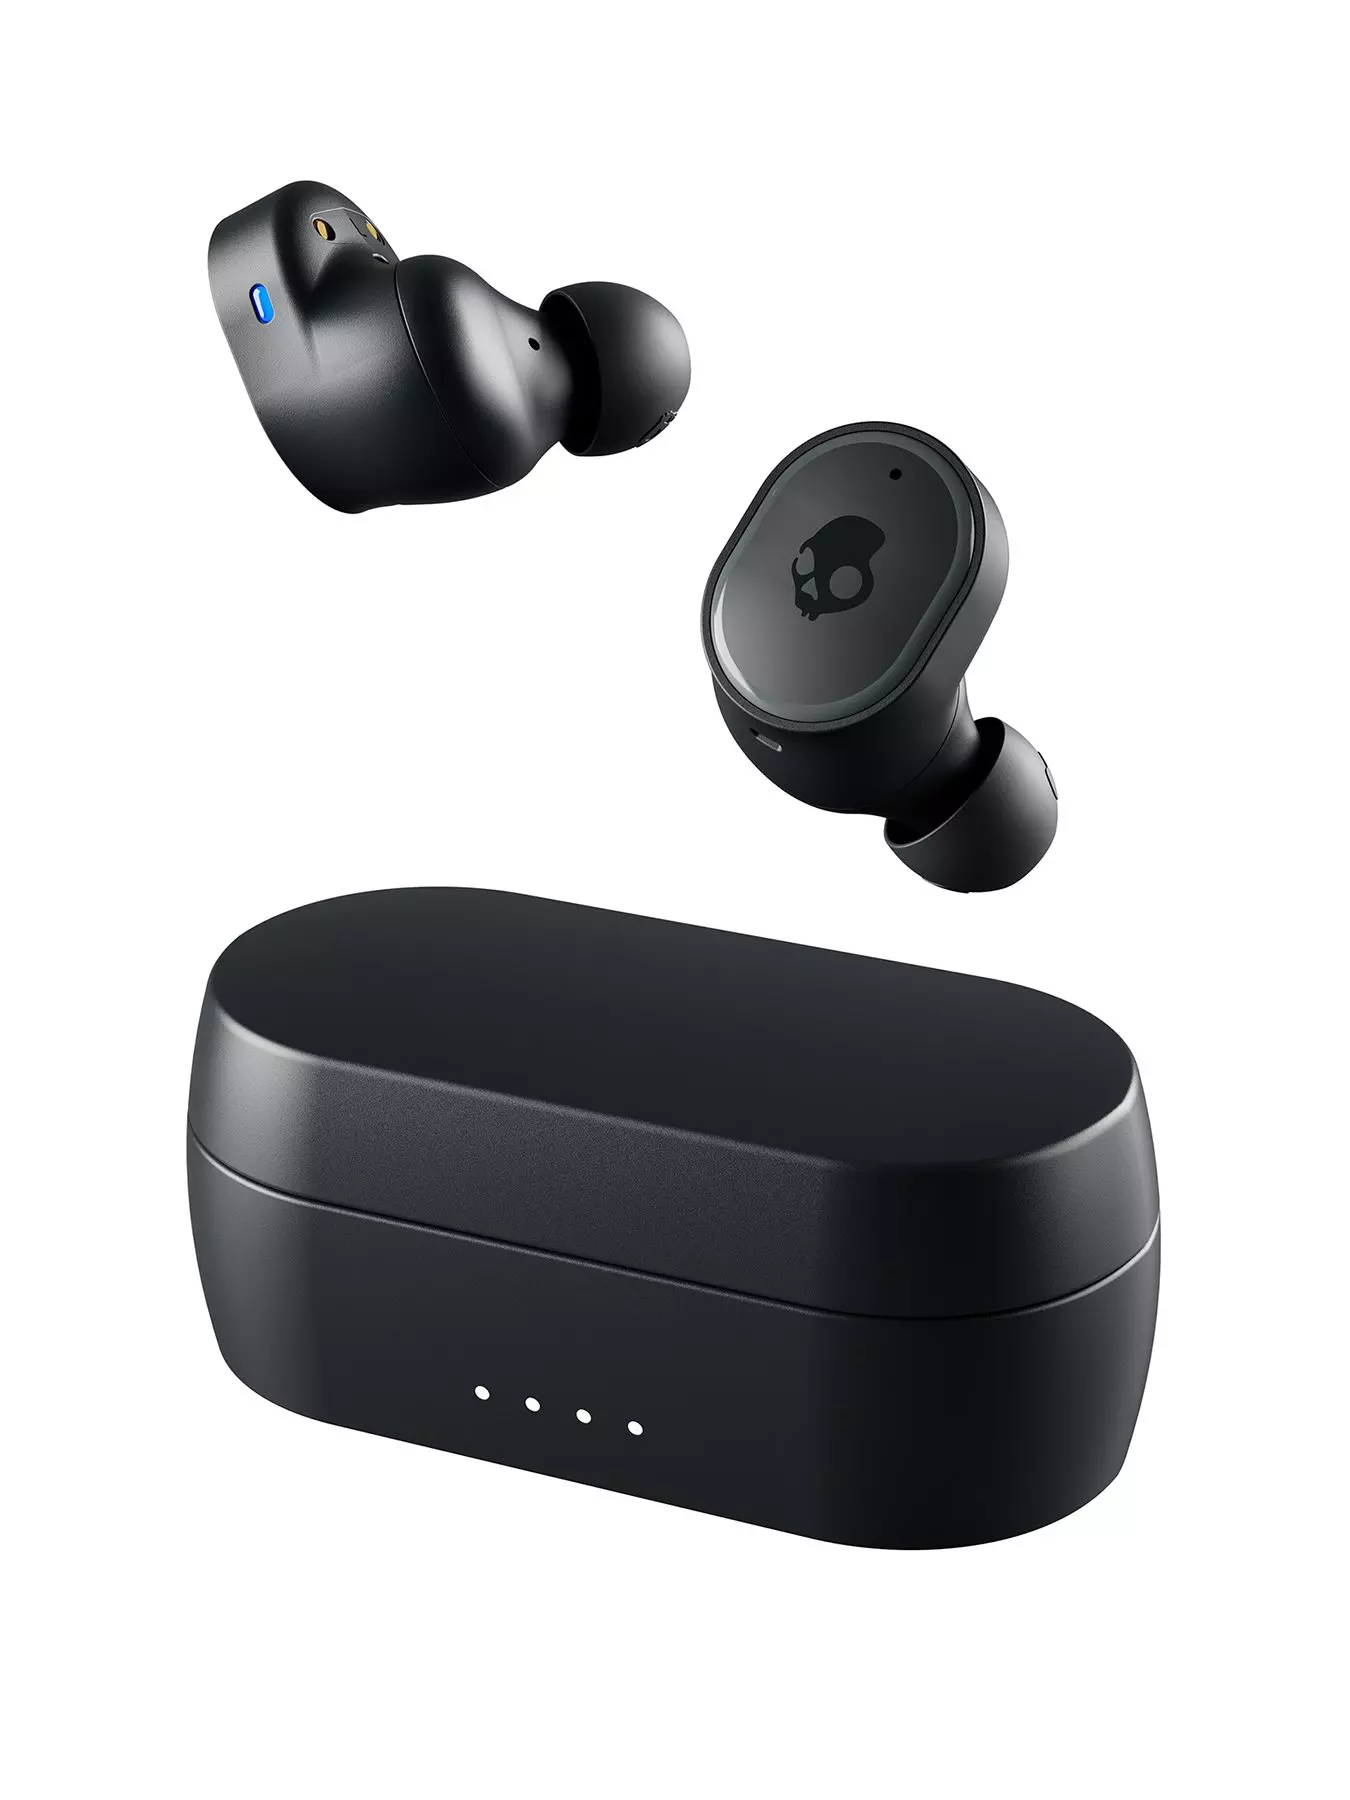  Nothing Ear 2 Hi-Res Wireless Earbuds, 2023 New Noise  Cancelling Headphones with Dual Chamber Design, Bluetooth Earbuds for  iPhone, Android, 4.5g Ultra Light, 36Hrs Playtime, Black : Electronics